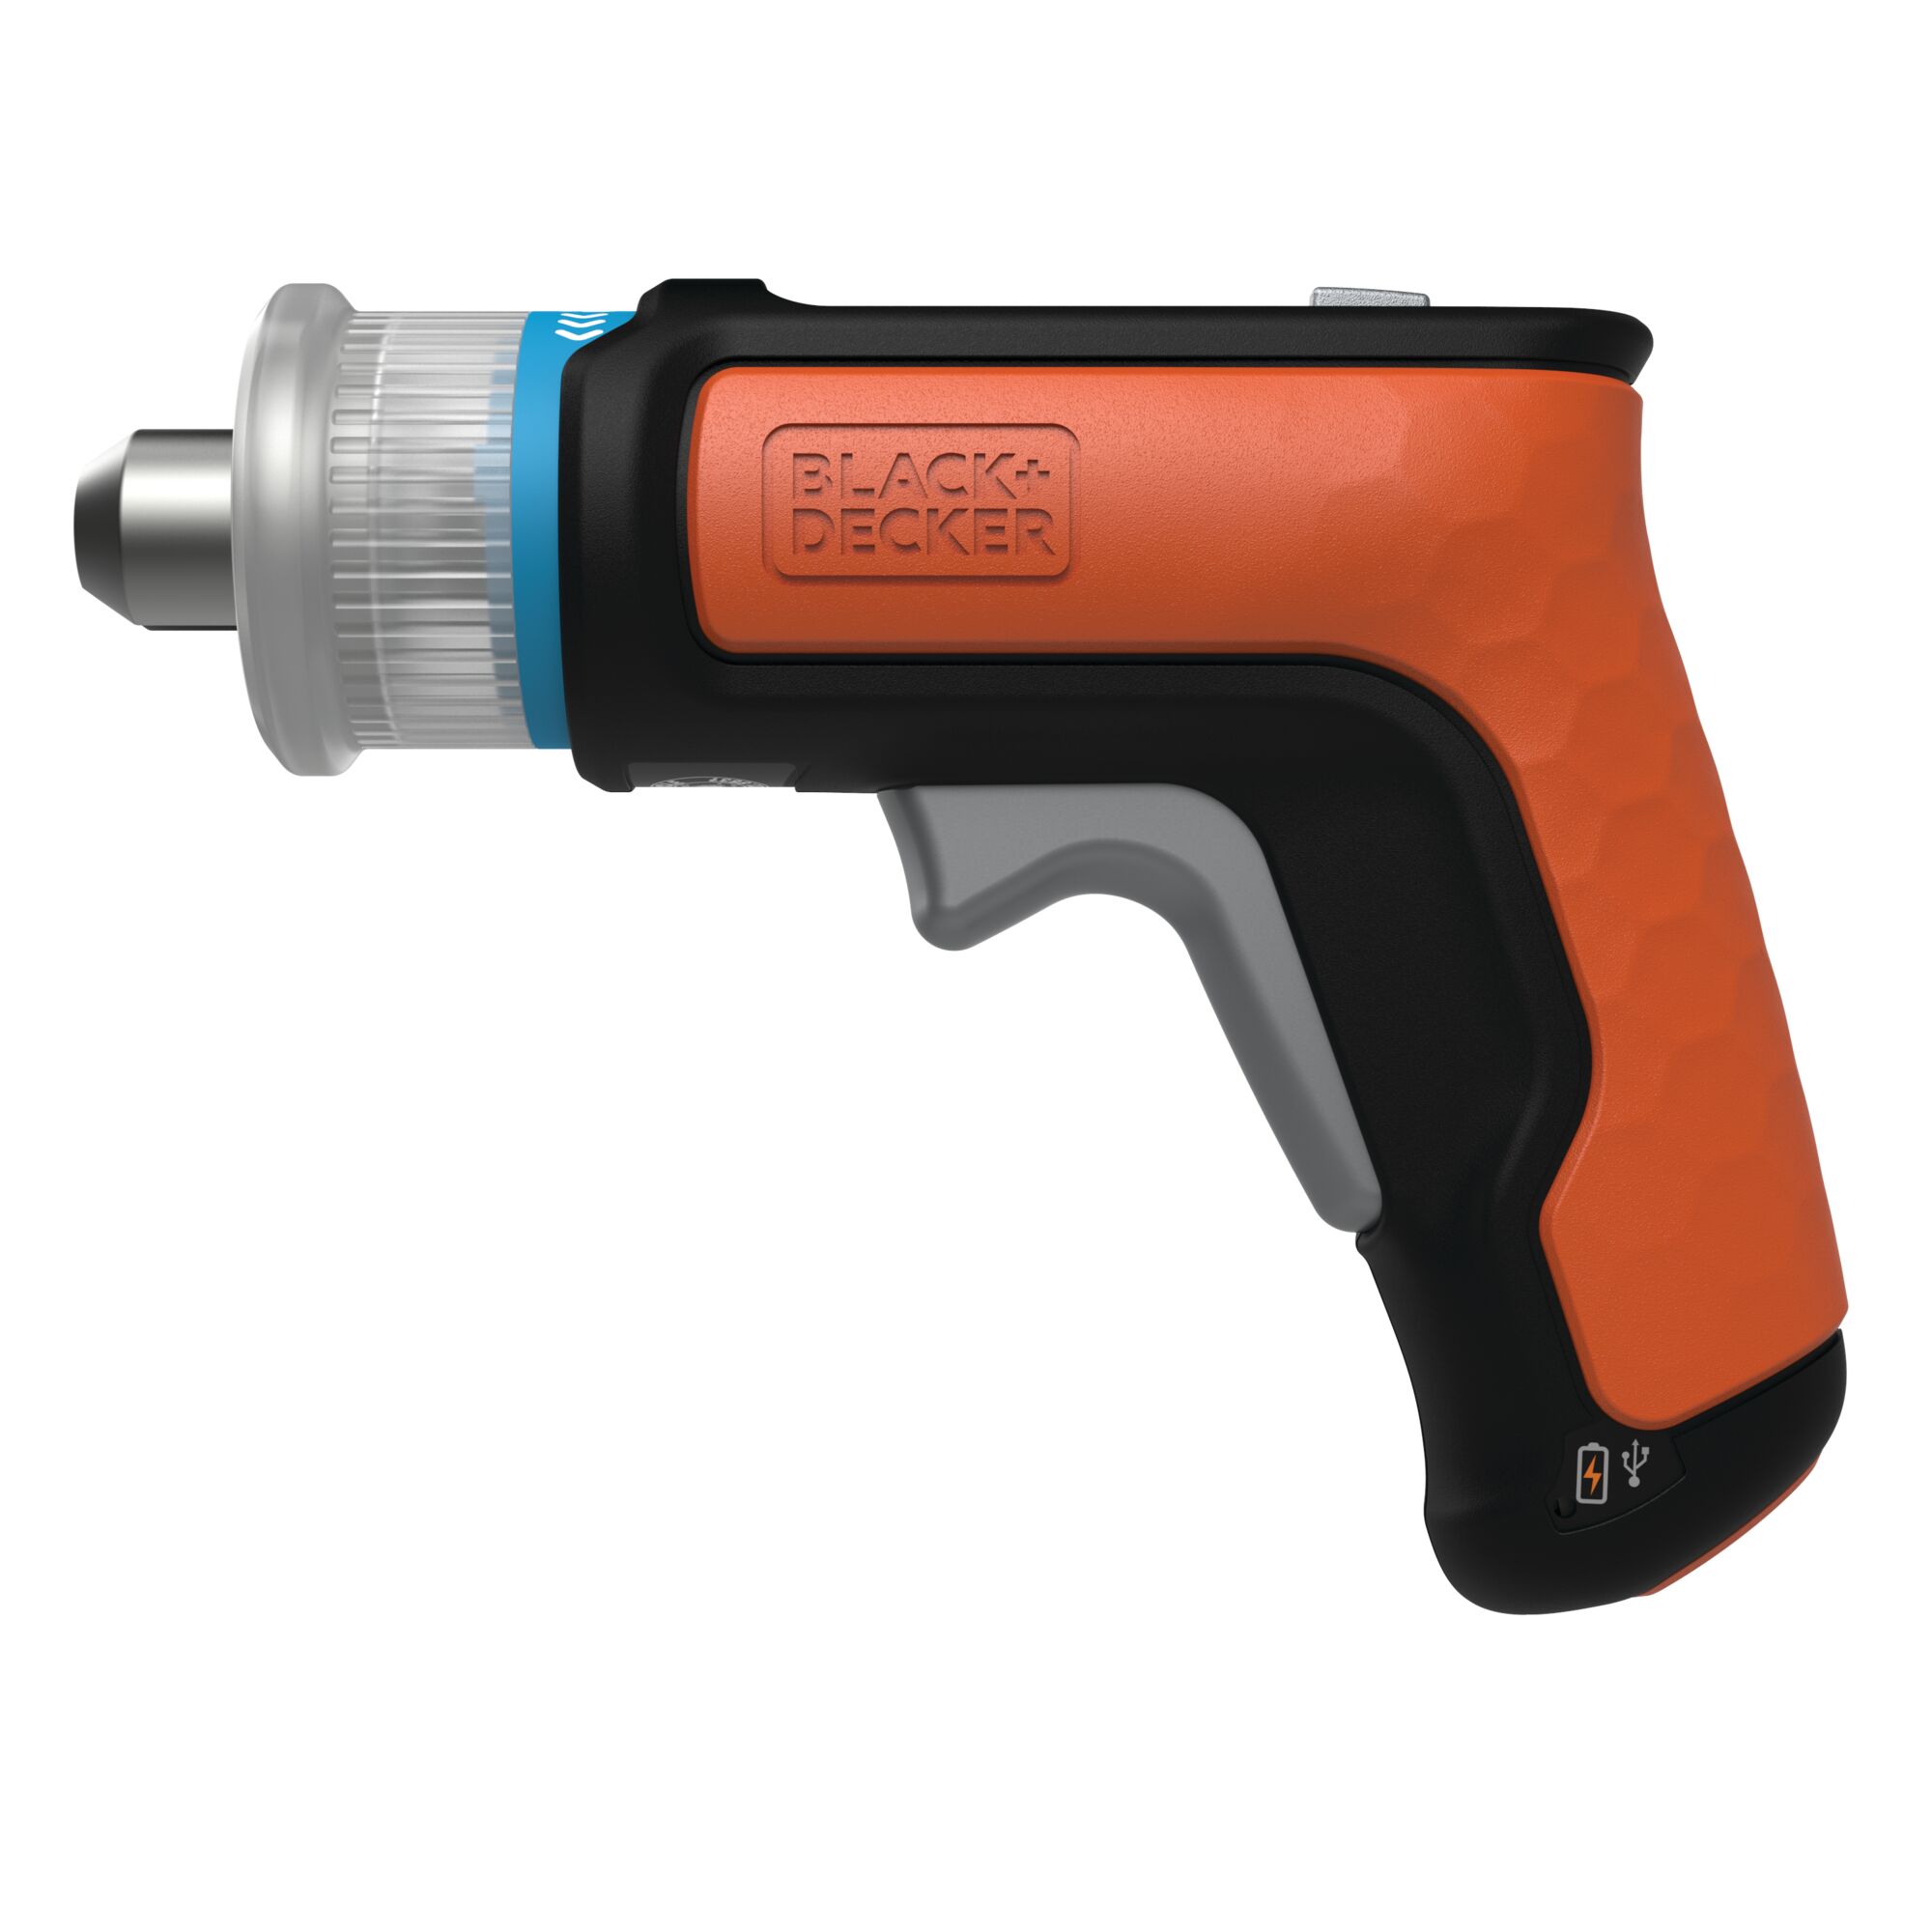 Profile of hexdriver cordless furniture assembly tool / screwdriver.